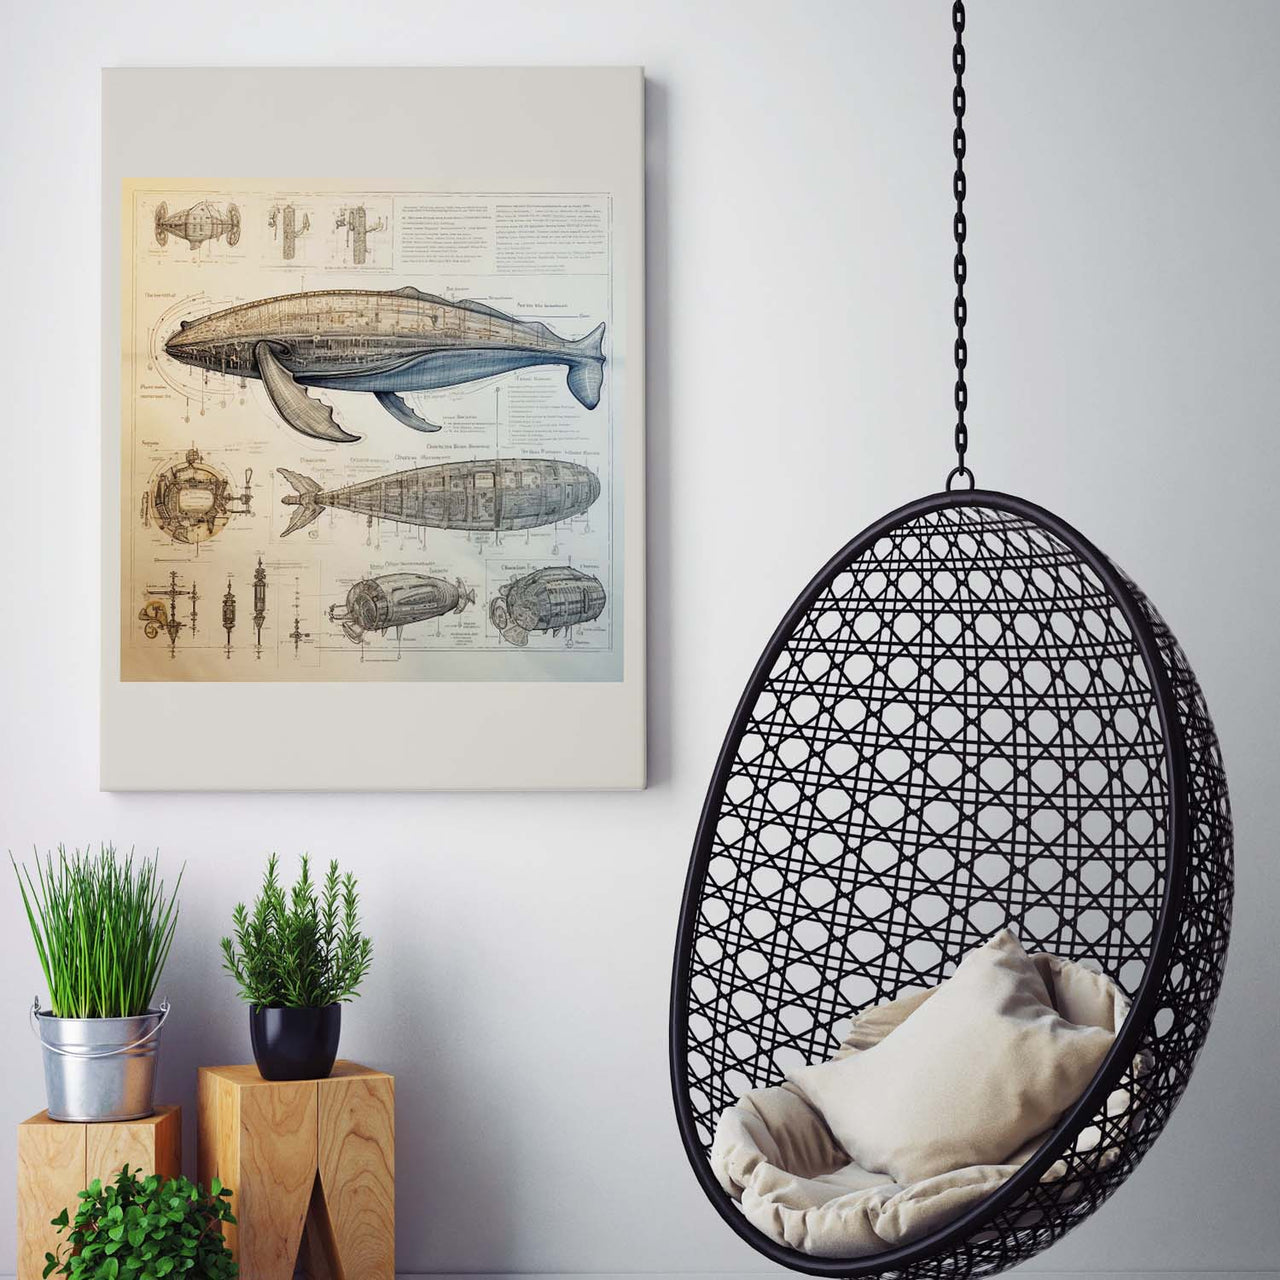 Drawings Whale 02 Da Vinci Style Vintage Framed Canvas Prints Wall Art Hanging Home Decor